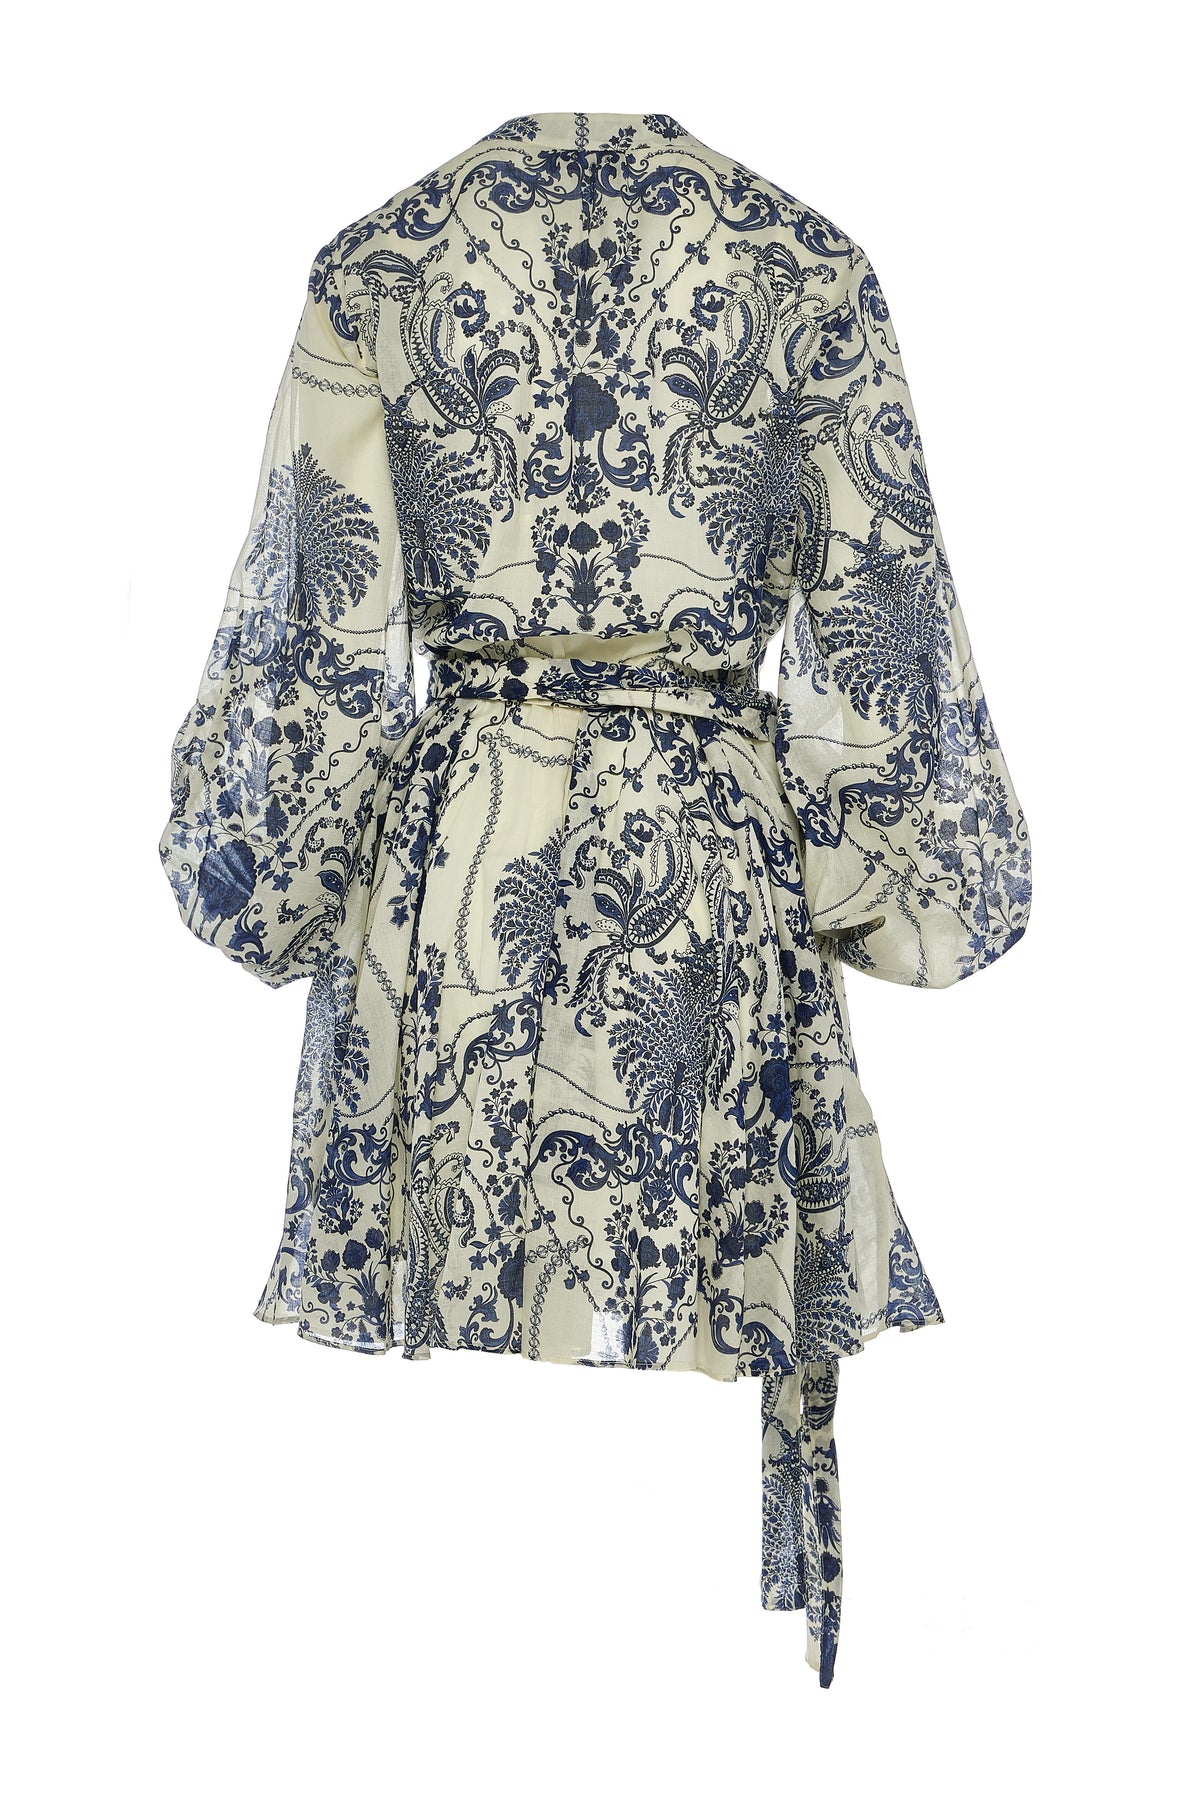 Willow print inspired short dress with fabric belt and long sleeves